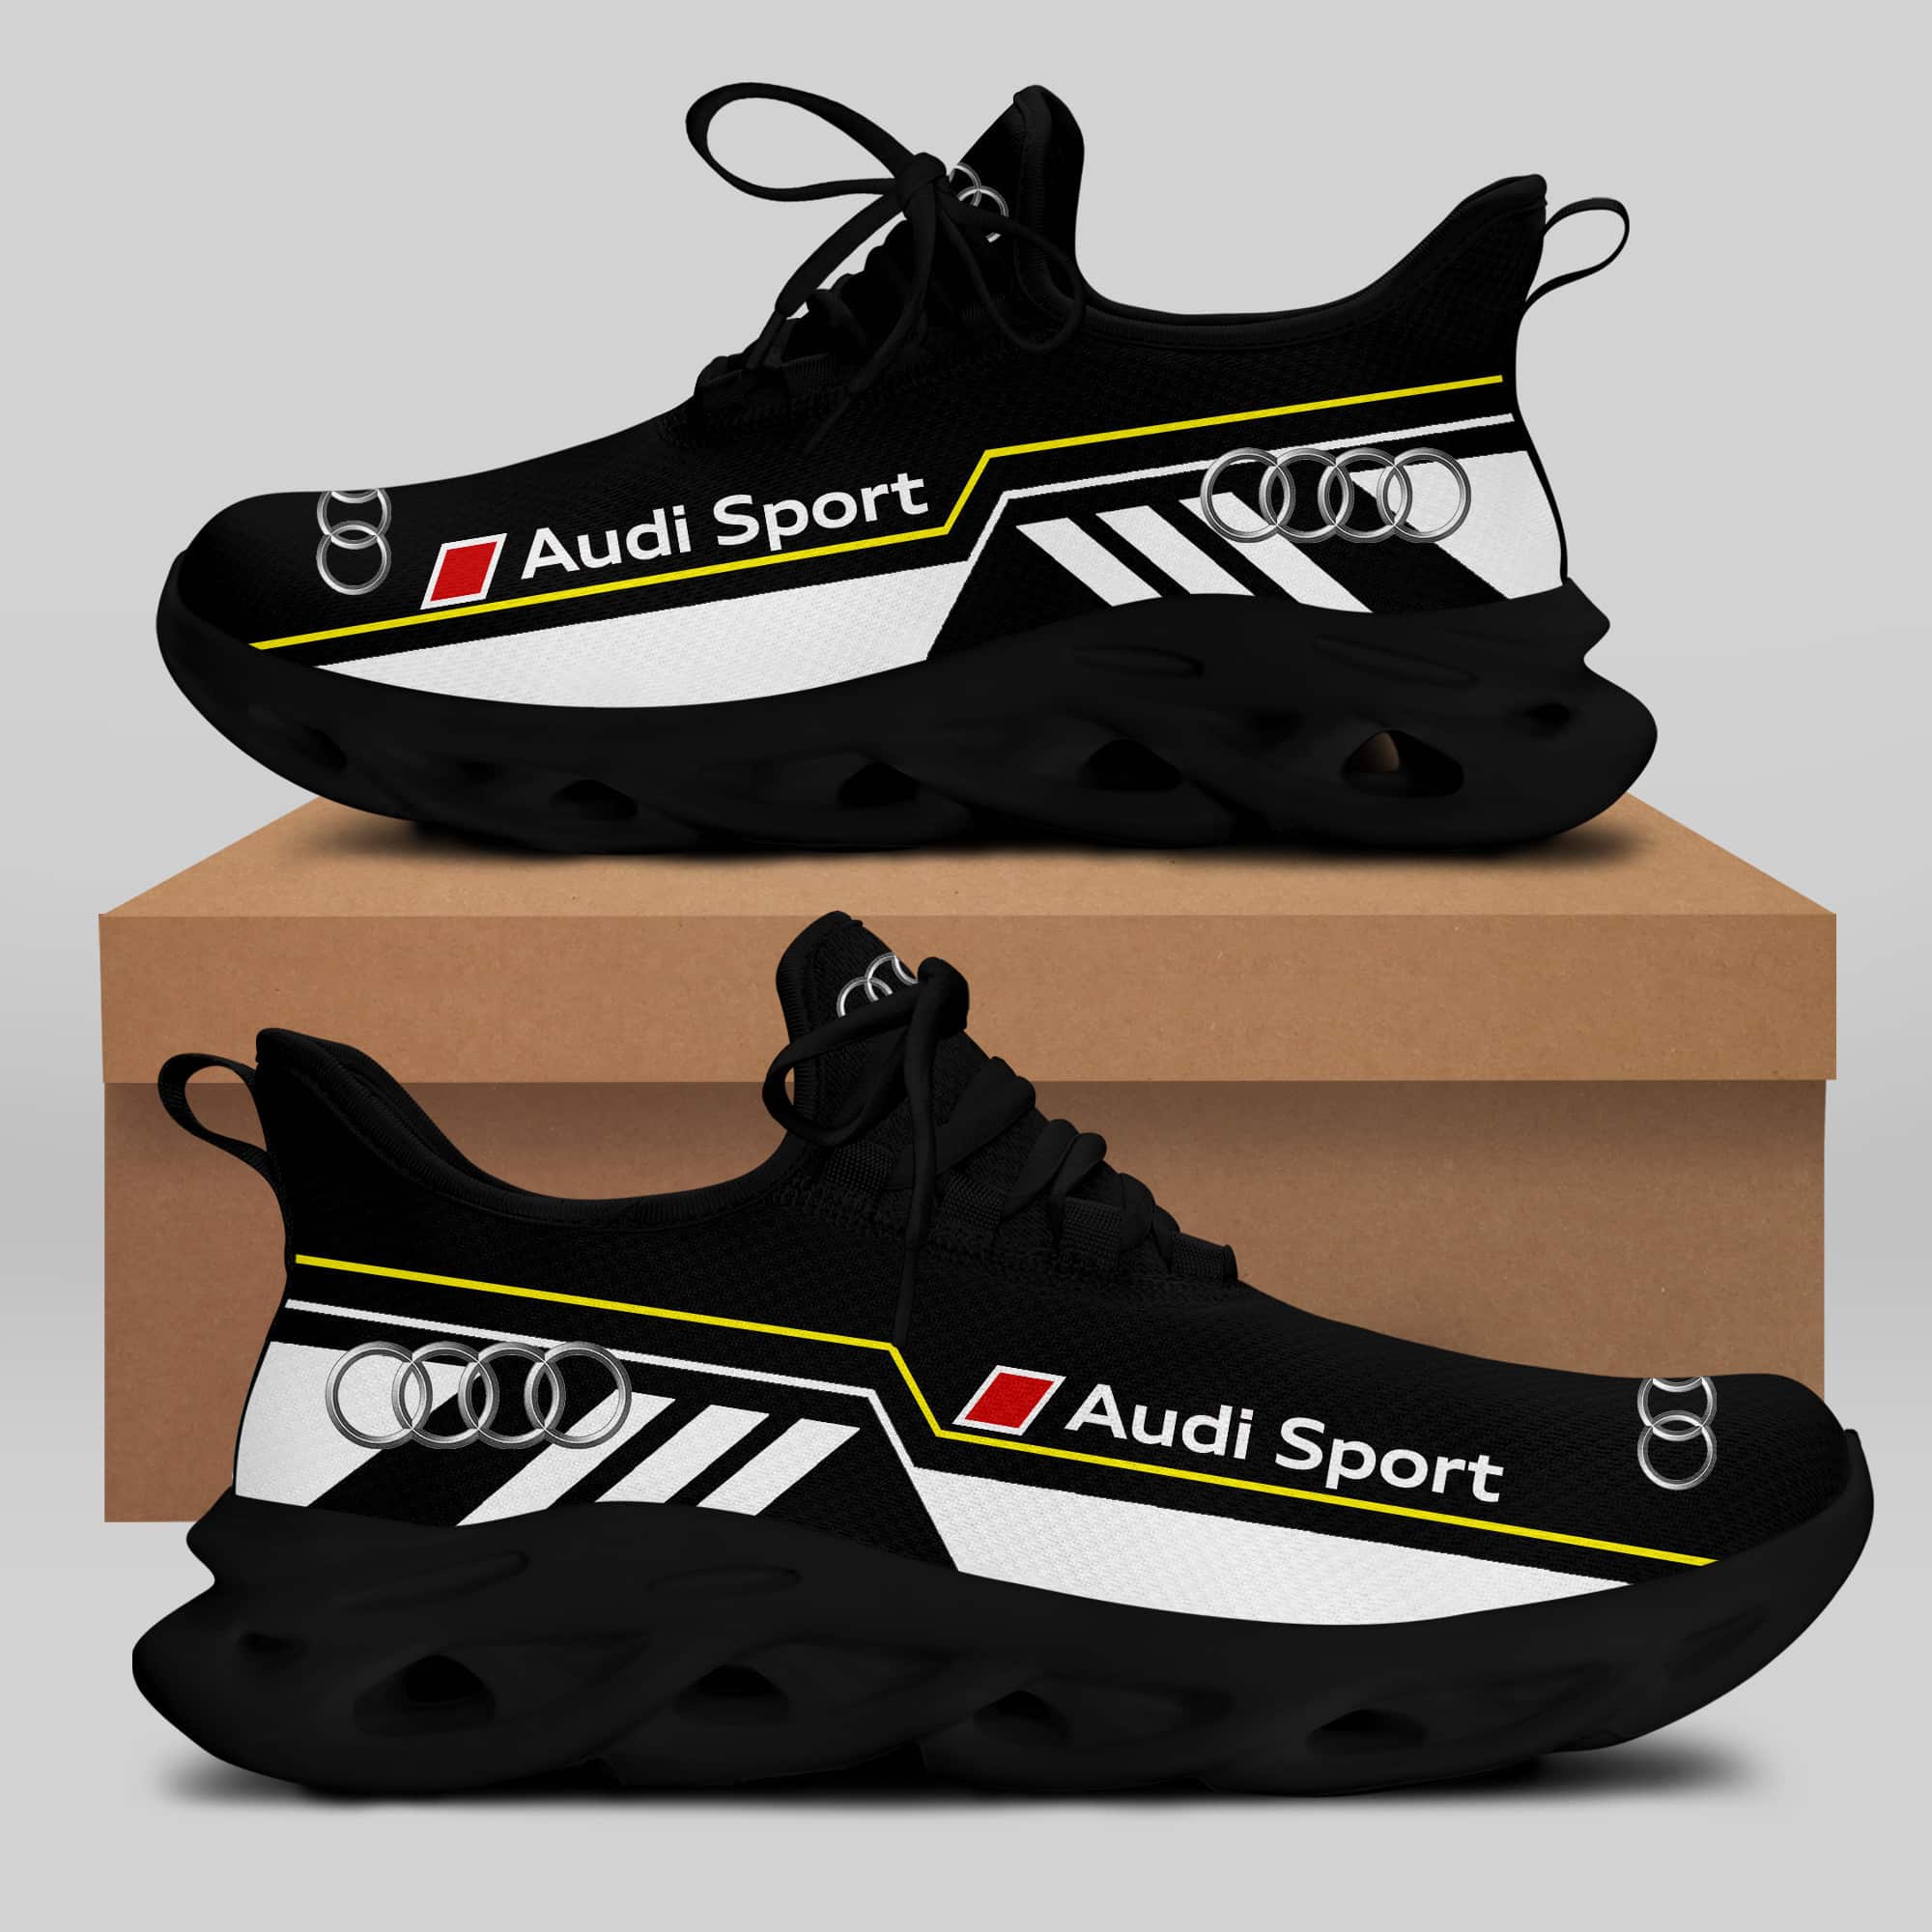 Audi Sport Running Shoes Max Soul Shoes Sneakers Ver 37 1